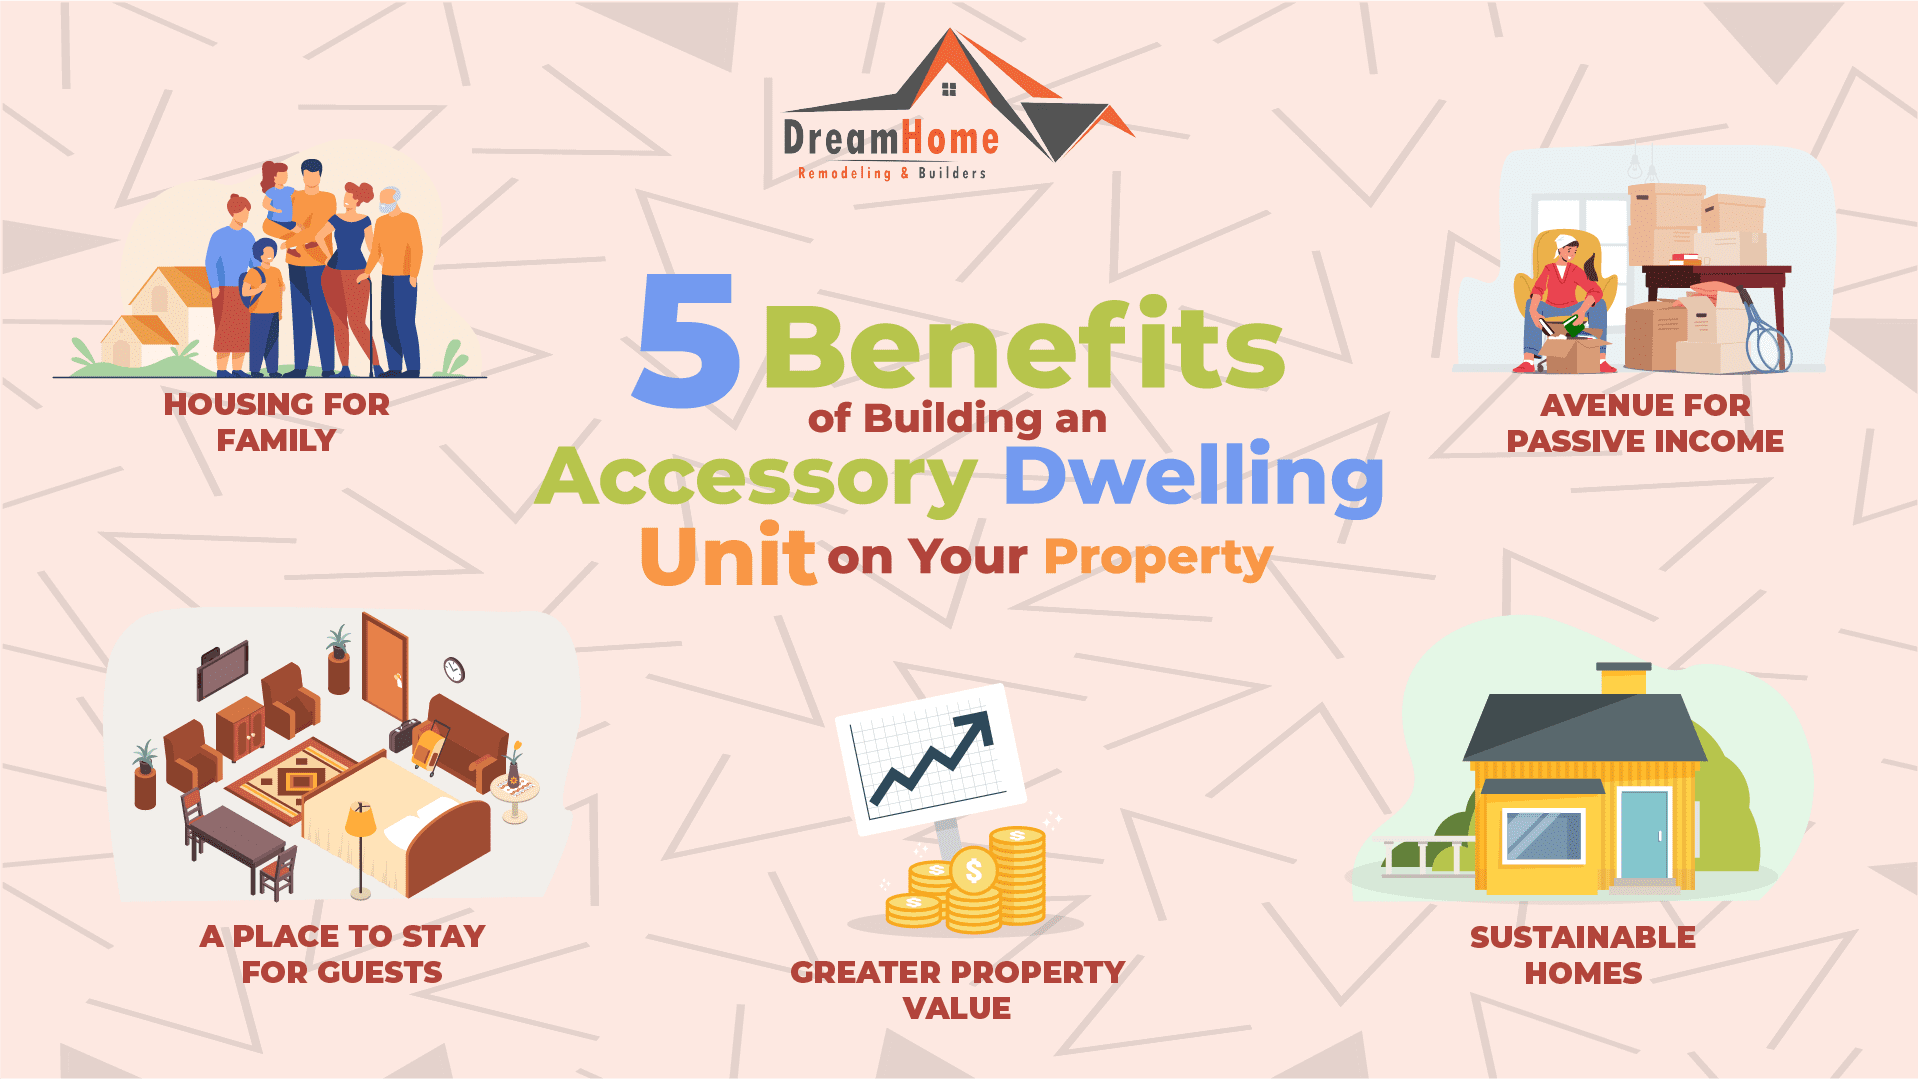 5 Benefits of Building an Accessory Dwelling Unit (ADU) on Your Property